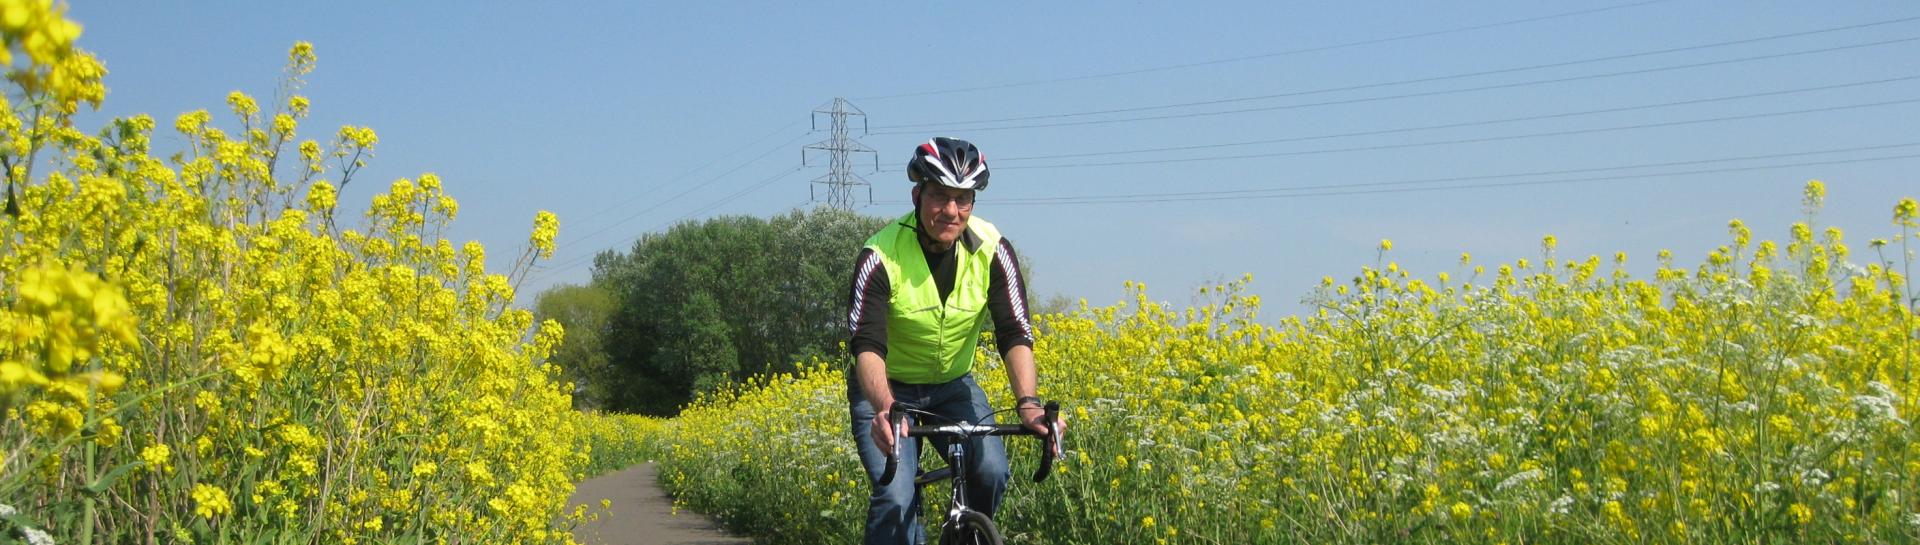 Cyclist on cycle route in spring surrounded by yellow flowers